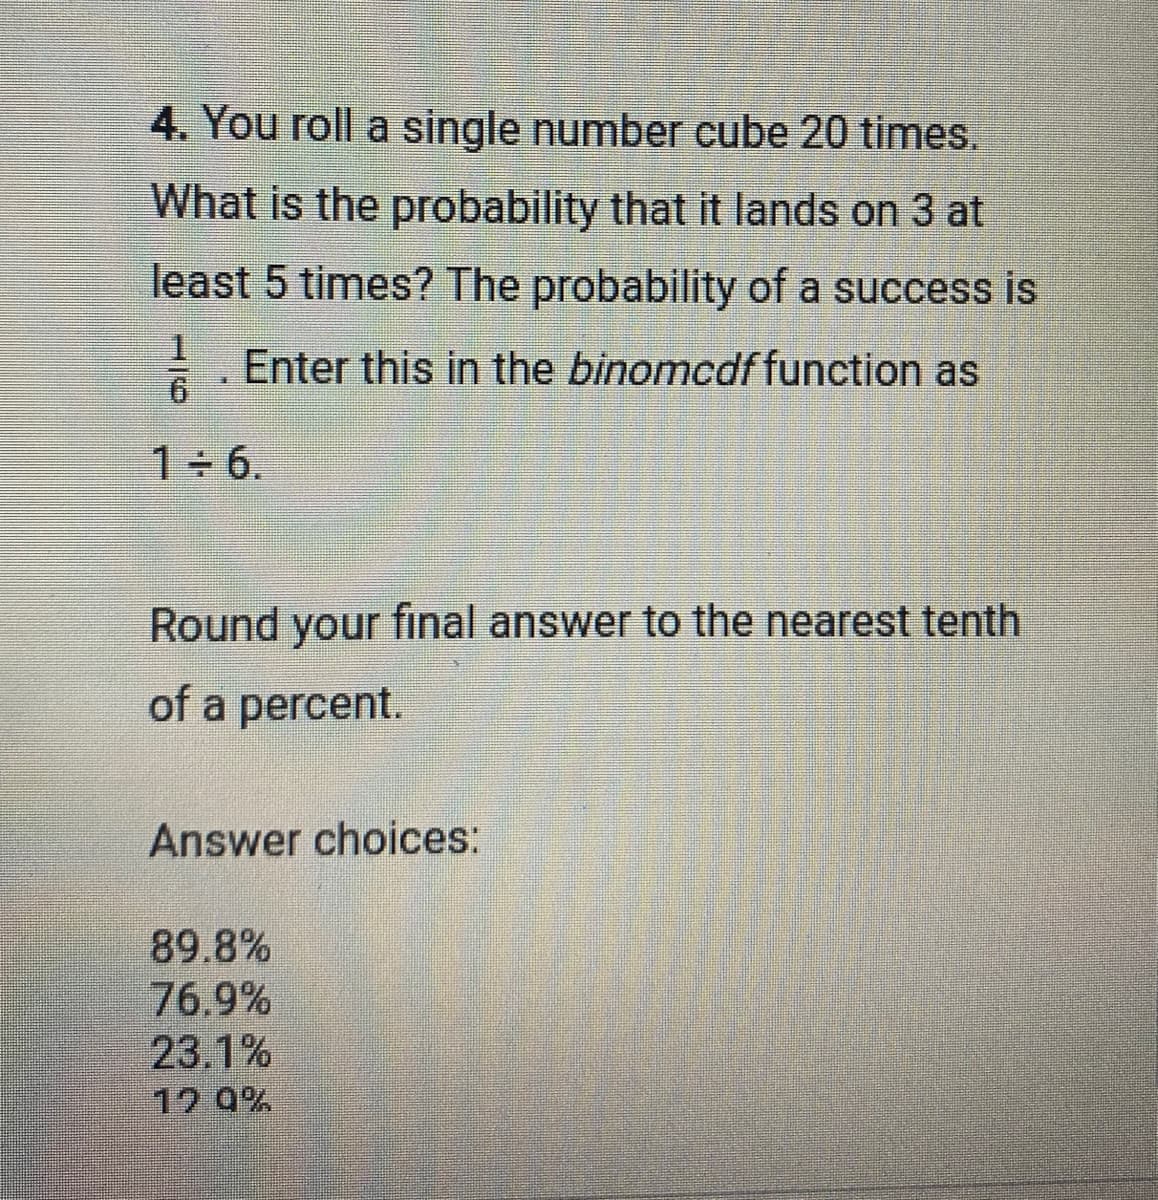 4. You roll a single number cube 20 times.
What is the probability that it lands on 3 at
least 5 times? The probability of a success is
1
Enter this in the binomcdf function as
6
1÷6.
Round your final answer to the nearest tenth
of a percent.
Answer choices:
89.8%
76.9%
23.1%
12.9%